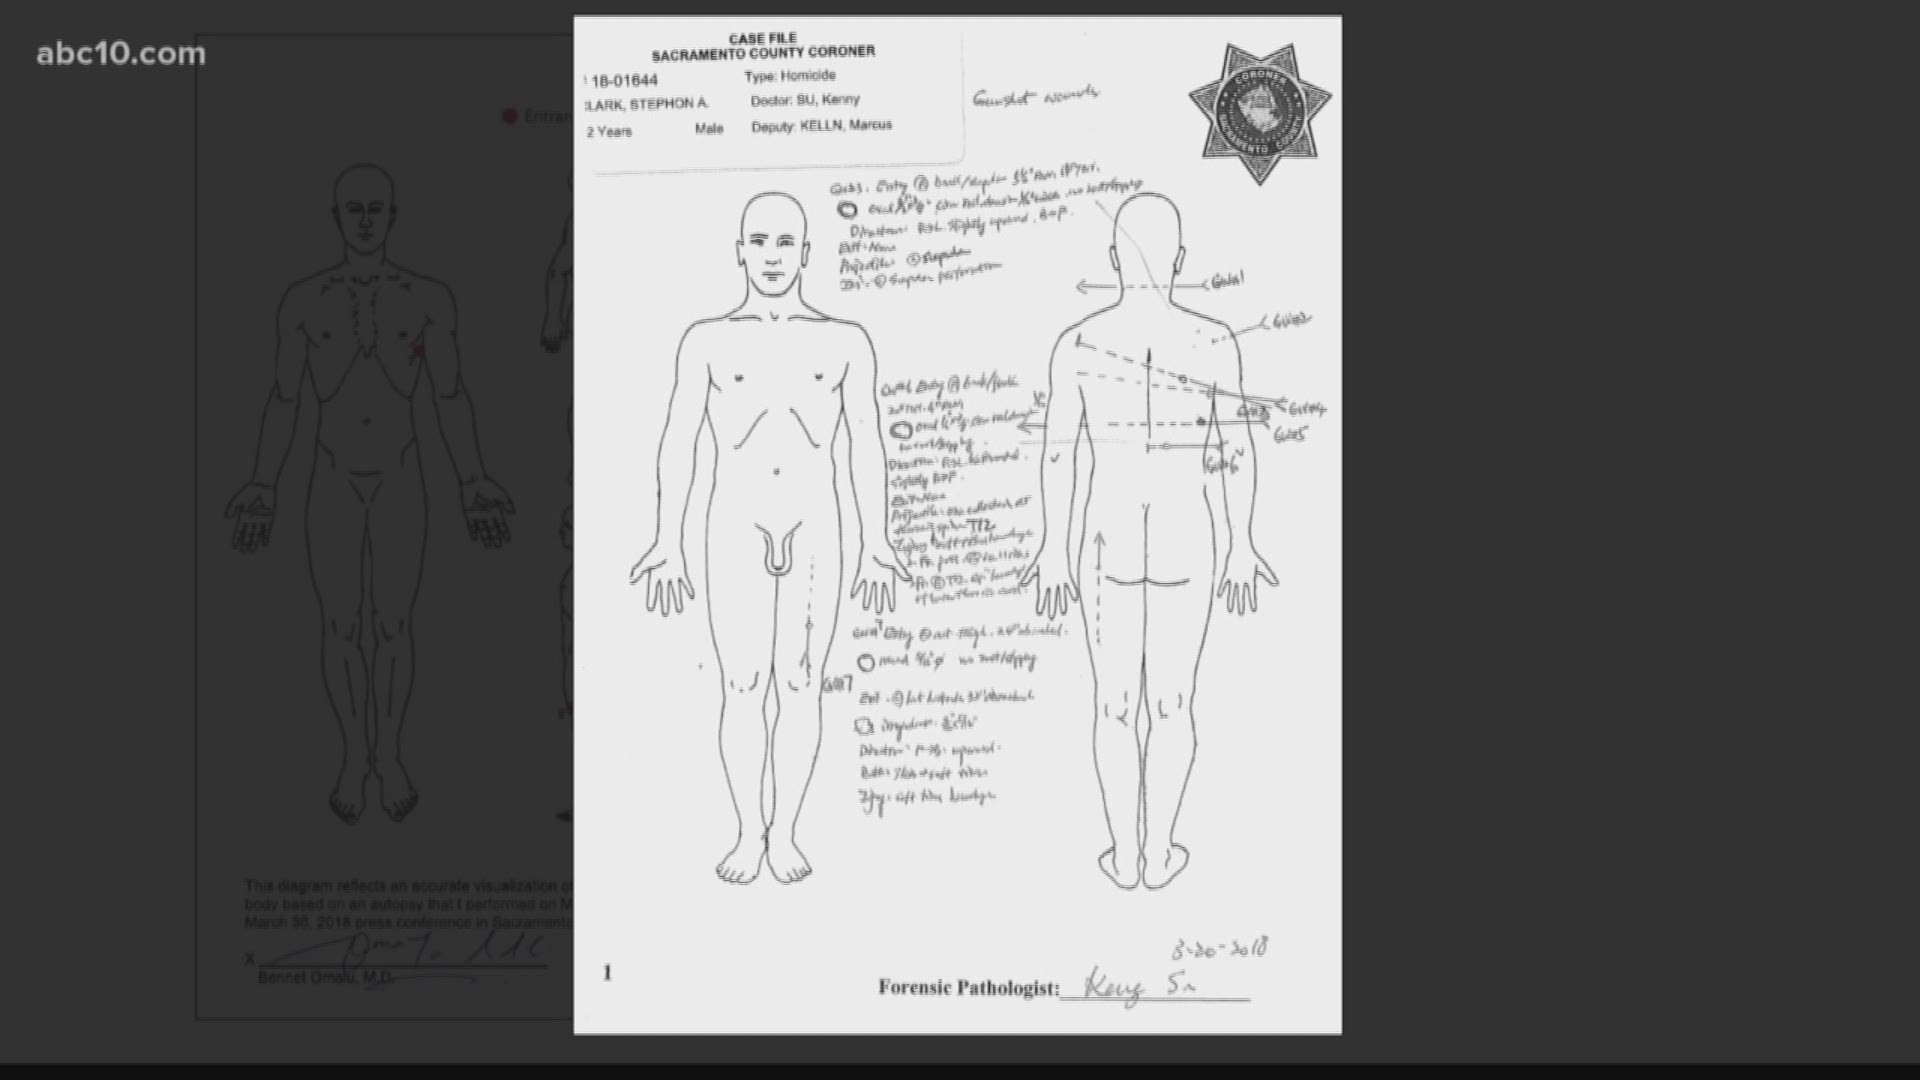 The Sacramento Police Department released their autopsy report for Stephon Clark Tuesday afternoon, stating the independent autopsy performed earlier this year provided inaccuracies.